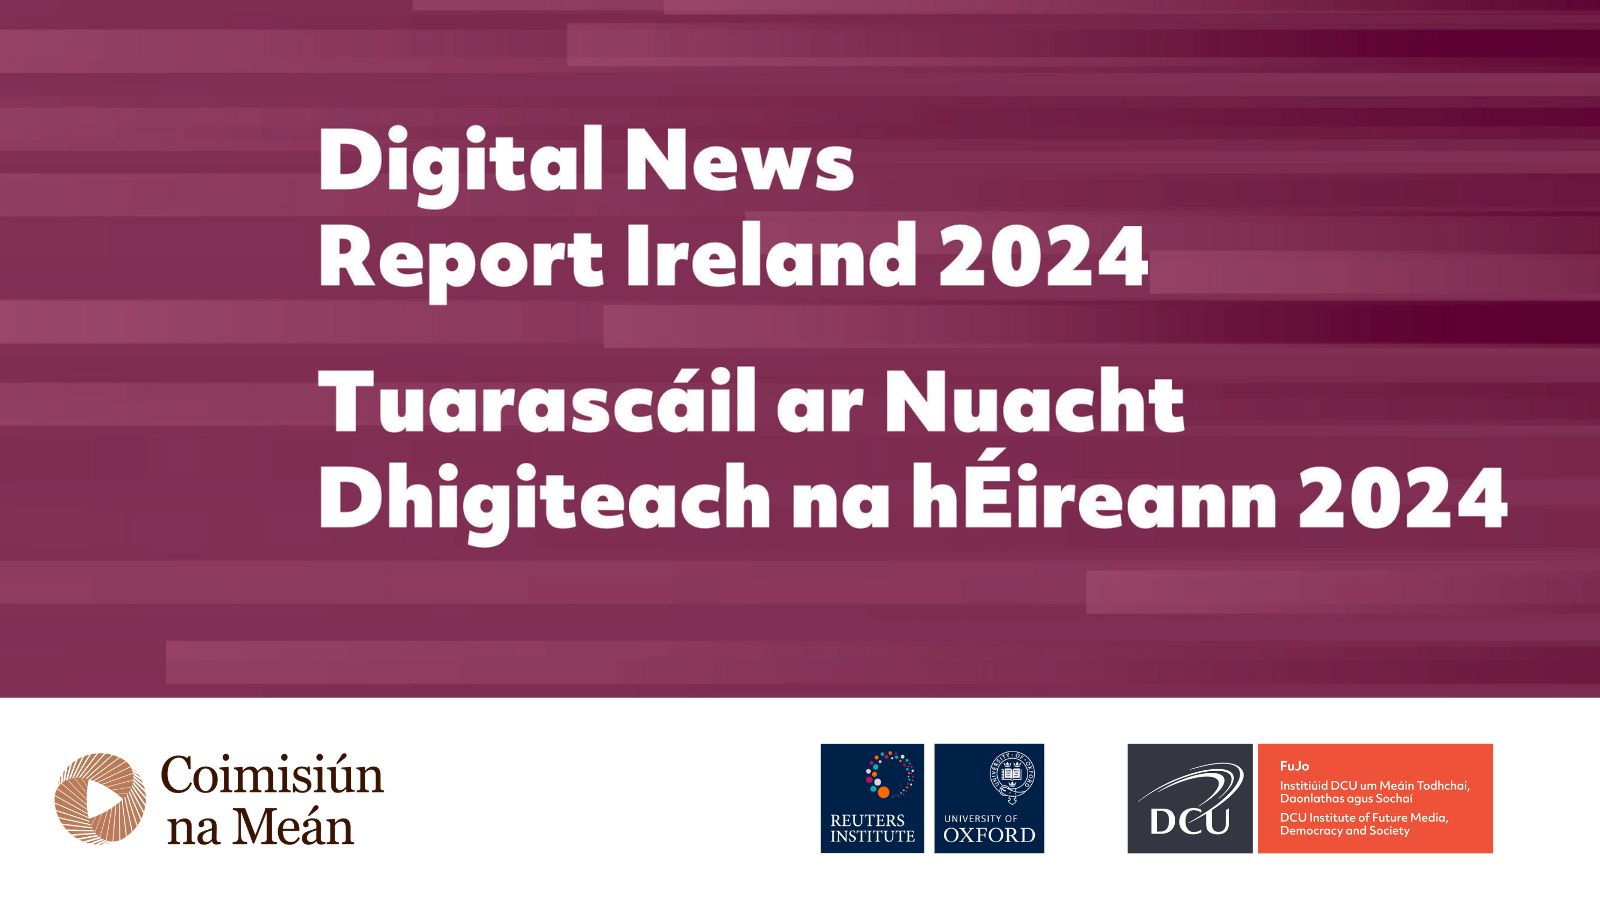 For the first time main source of News for Irish public is Online rather than Television – Digital News Report Ireland 2024